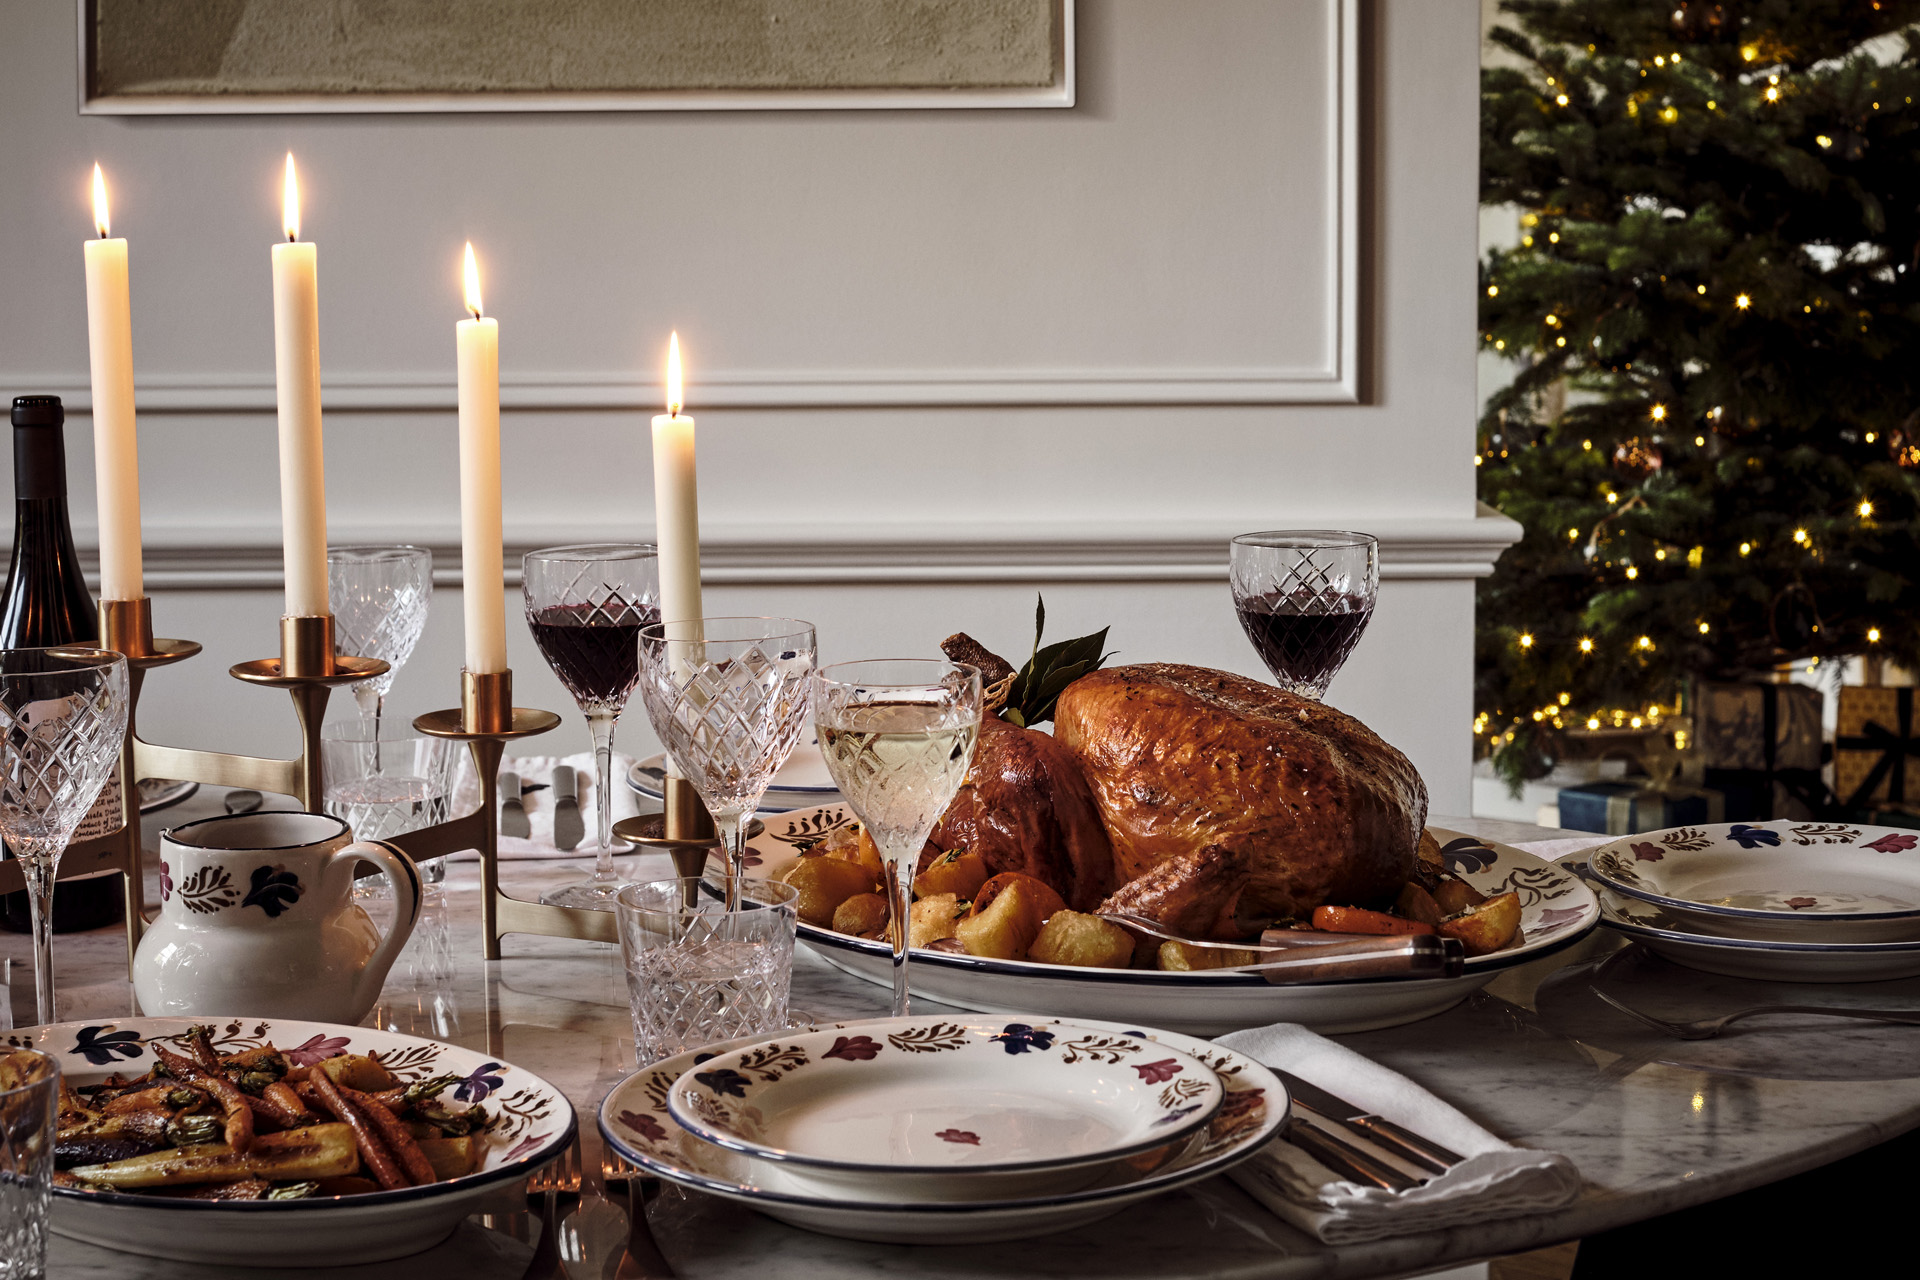 a festive table with turkey, candles, plates and a christmas tree